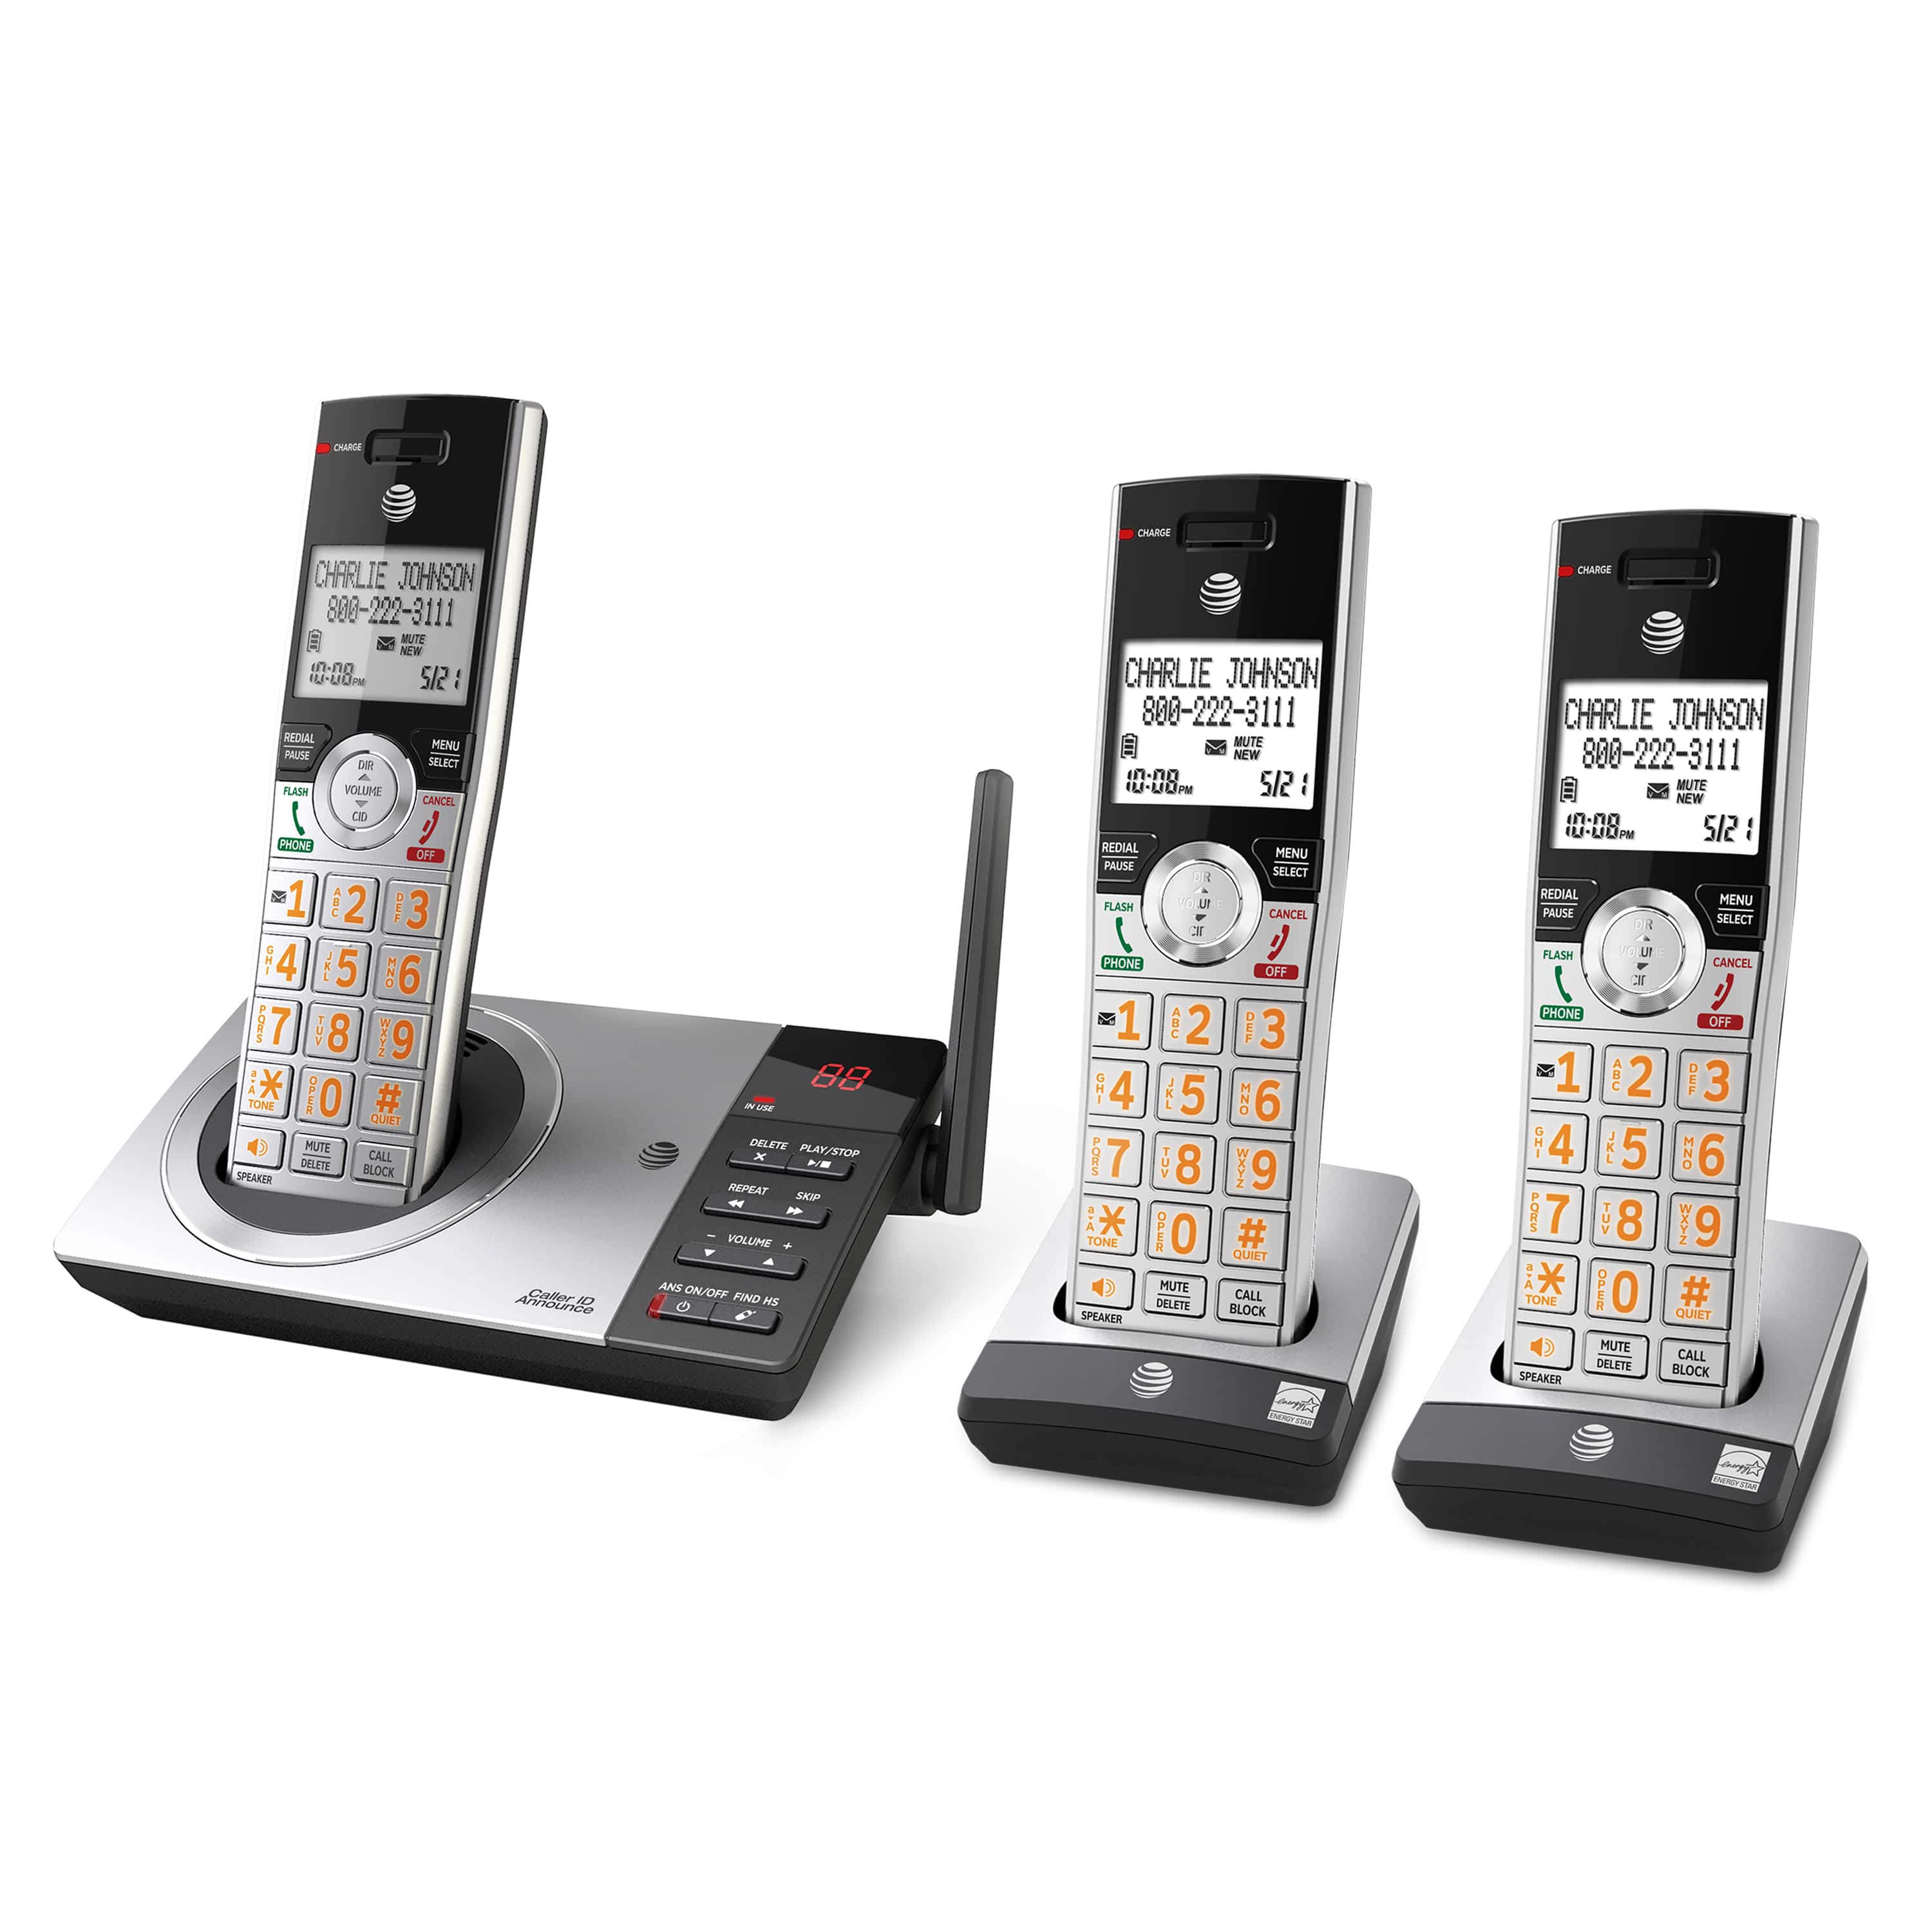 4 handset phone system with smart call blocker - view 2